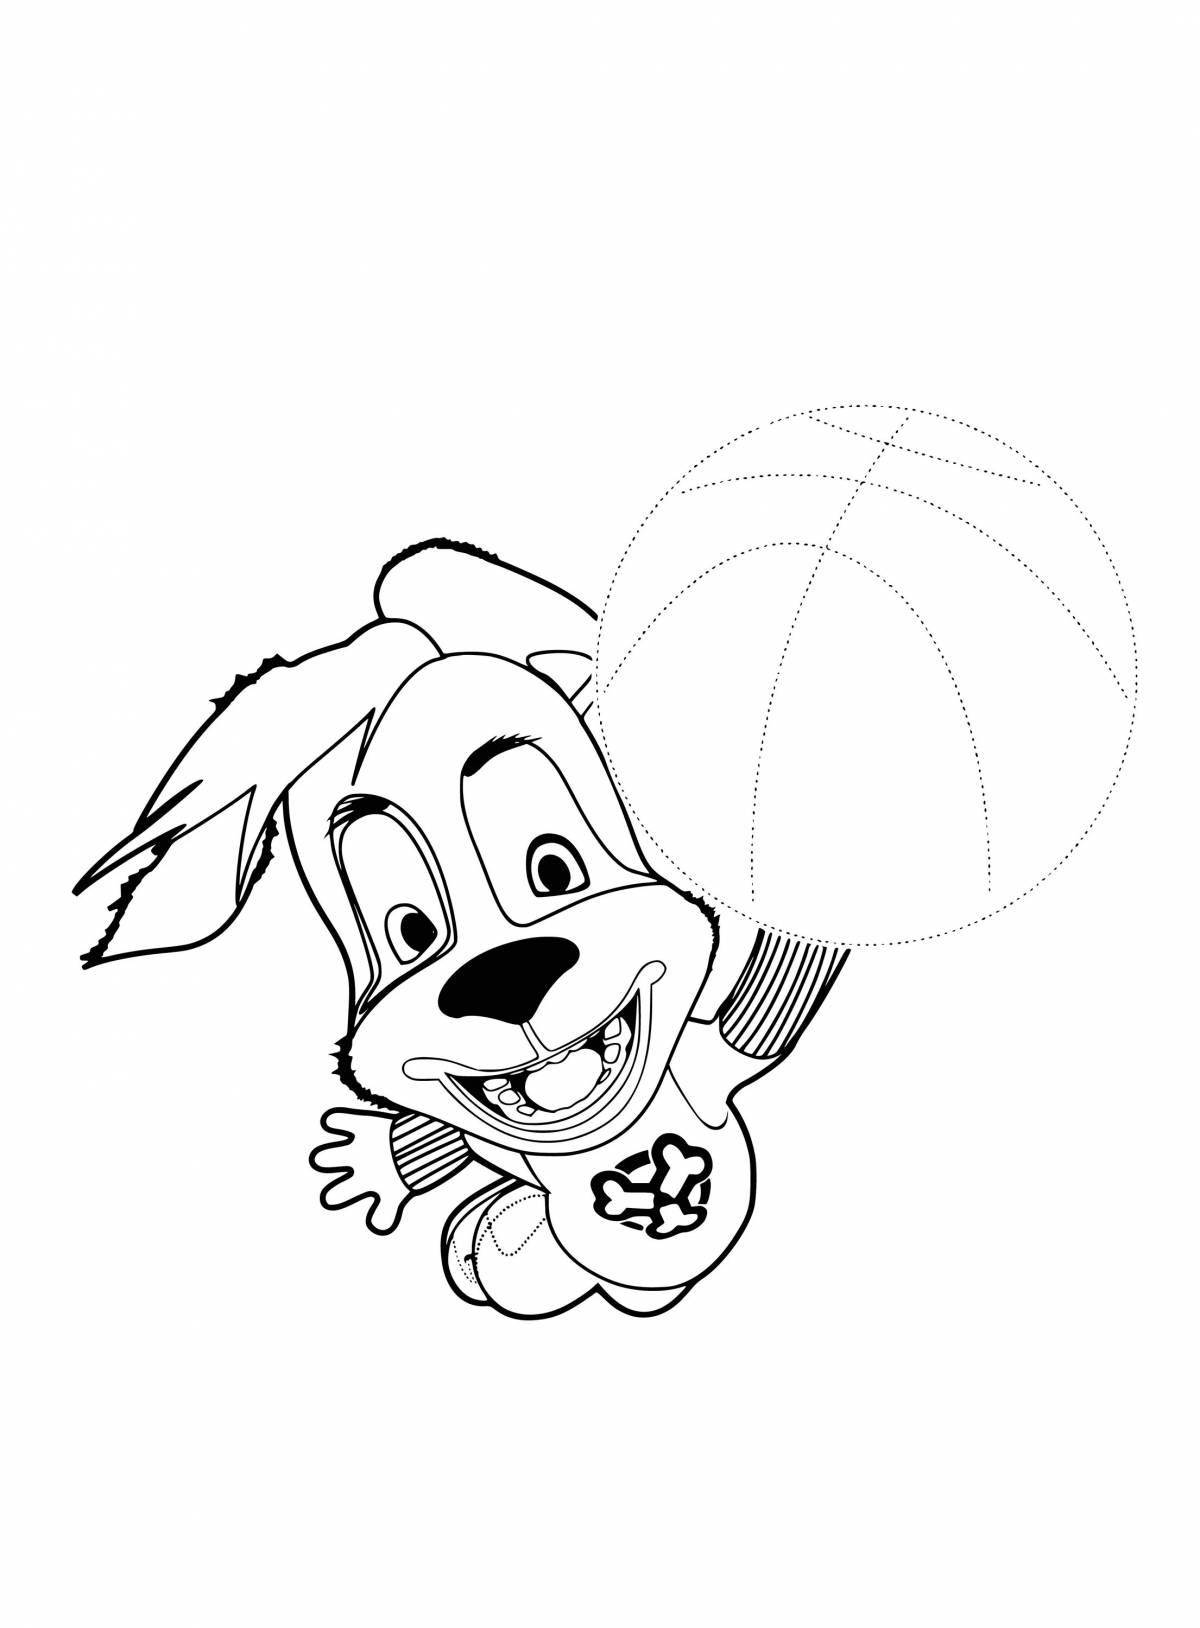 Color-frenzy coloring page buddy barboskin